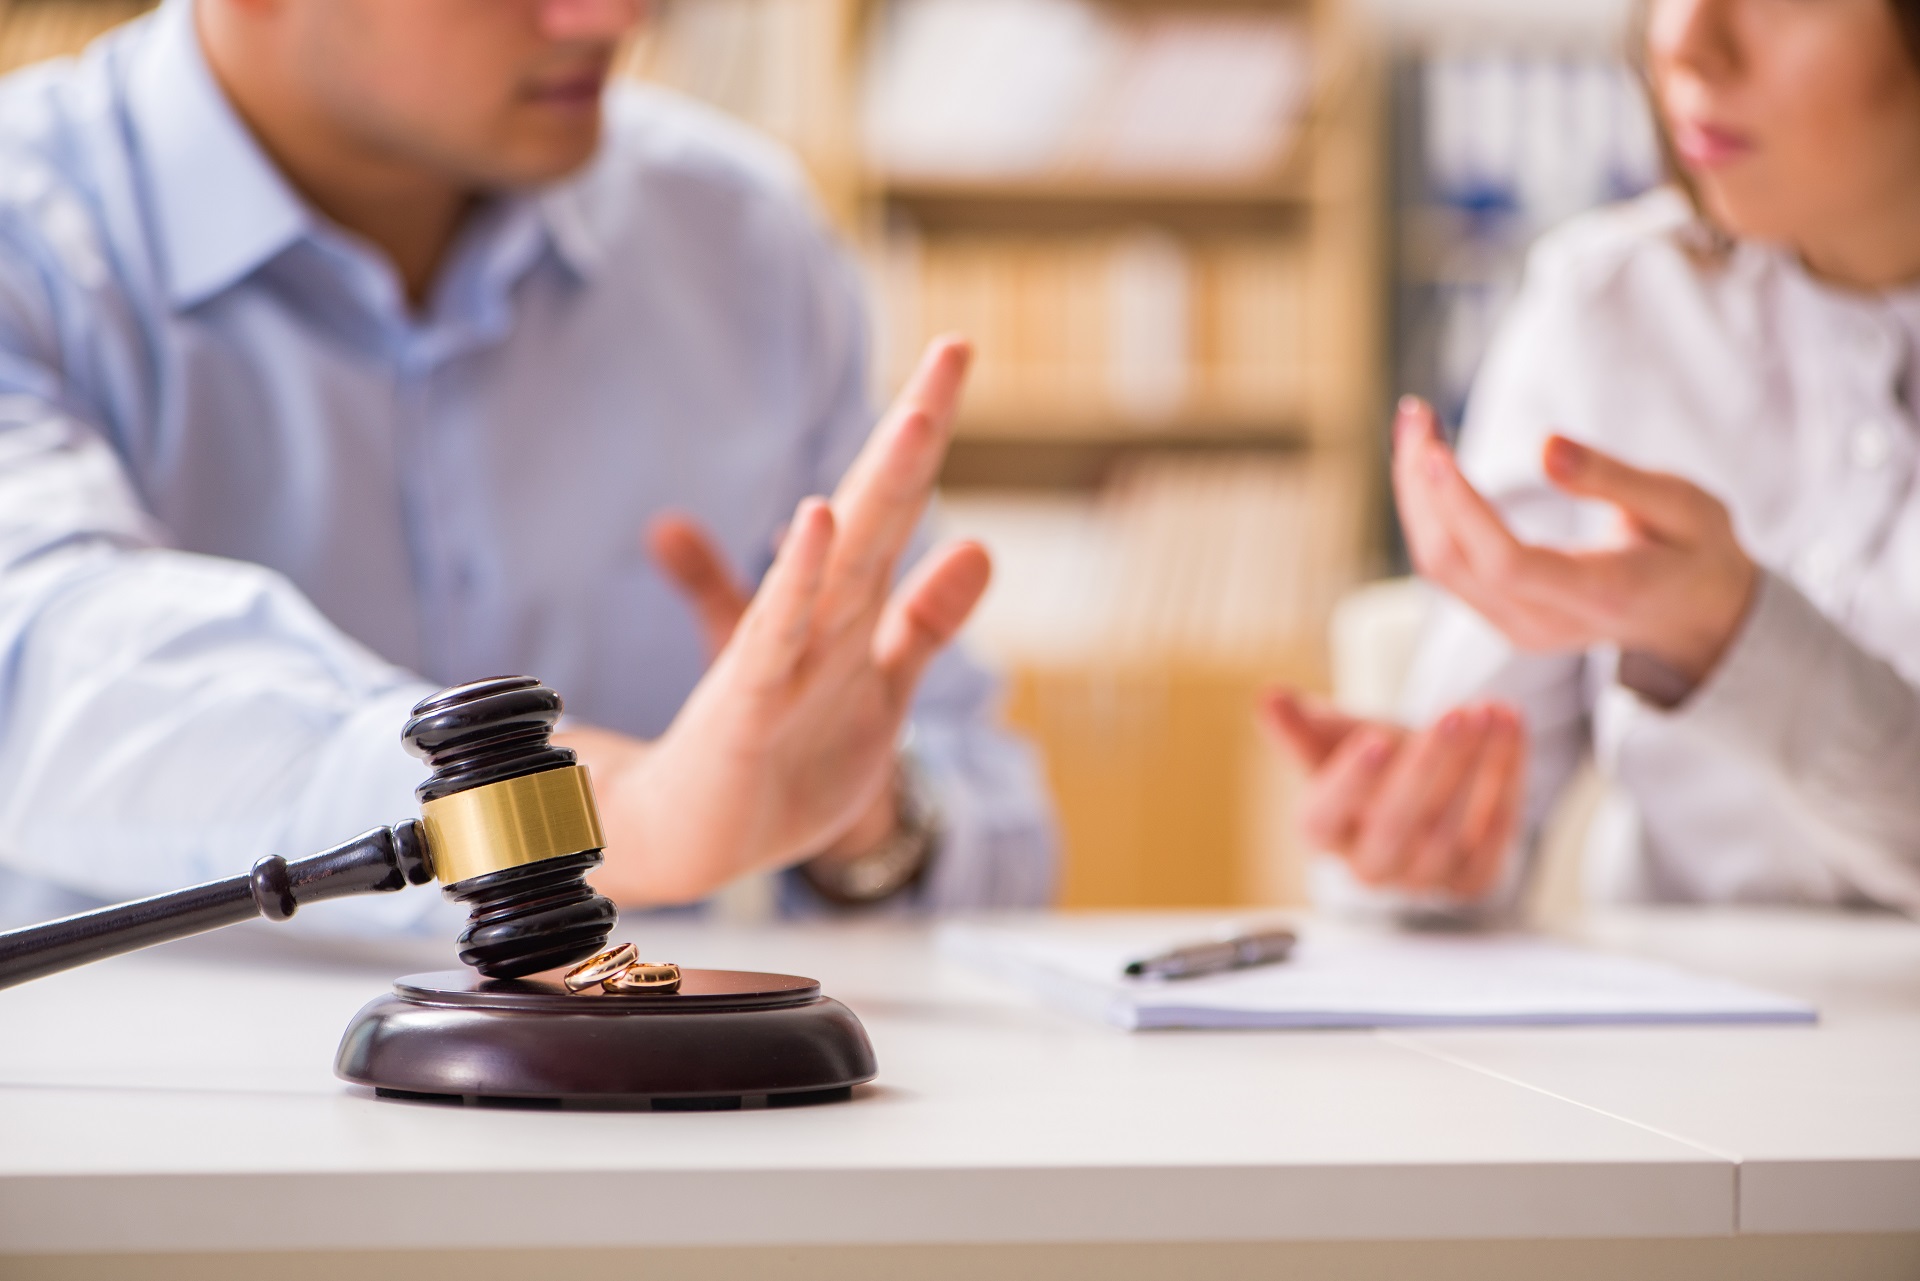 Wooden Gavel and Wedding Rings on a Desk | Divorce Lawyer Seattle | Hemmat Law Group